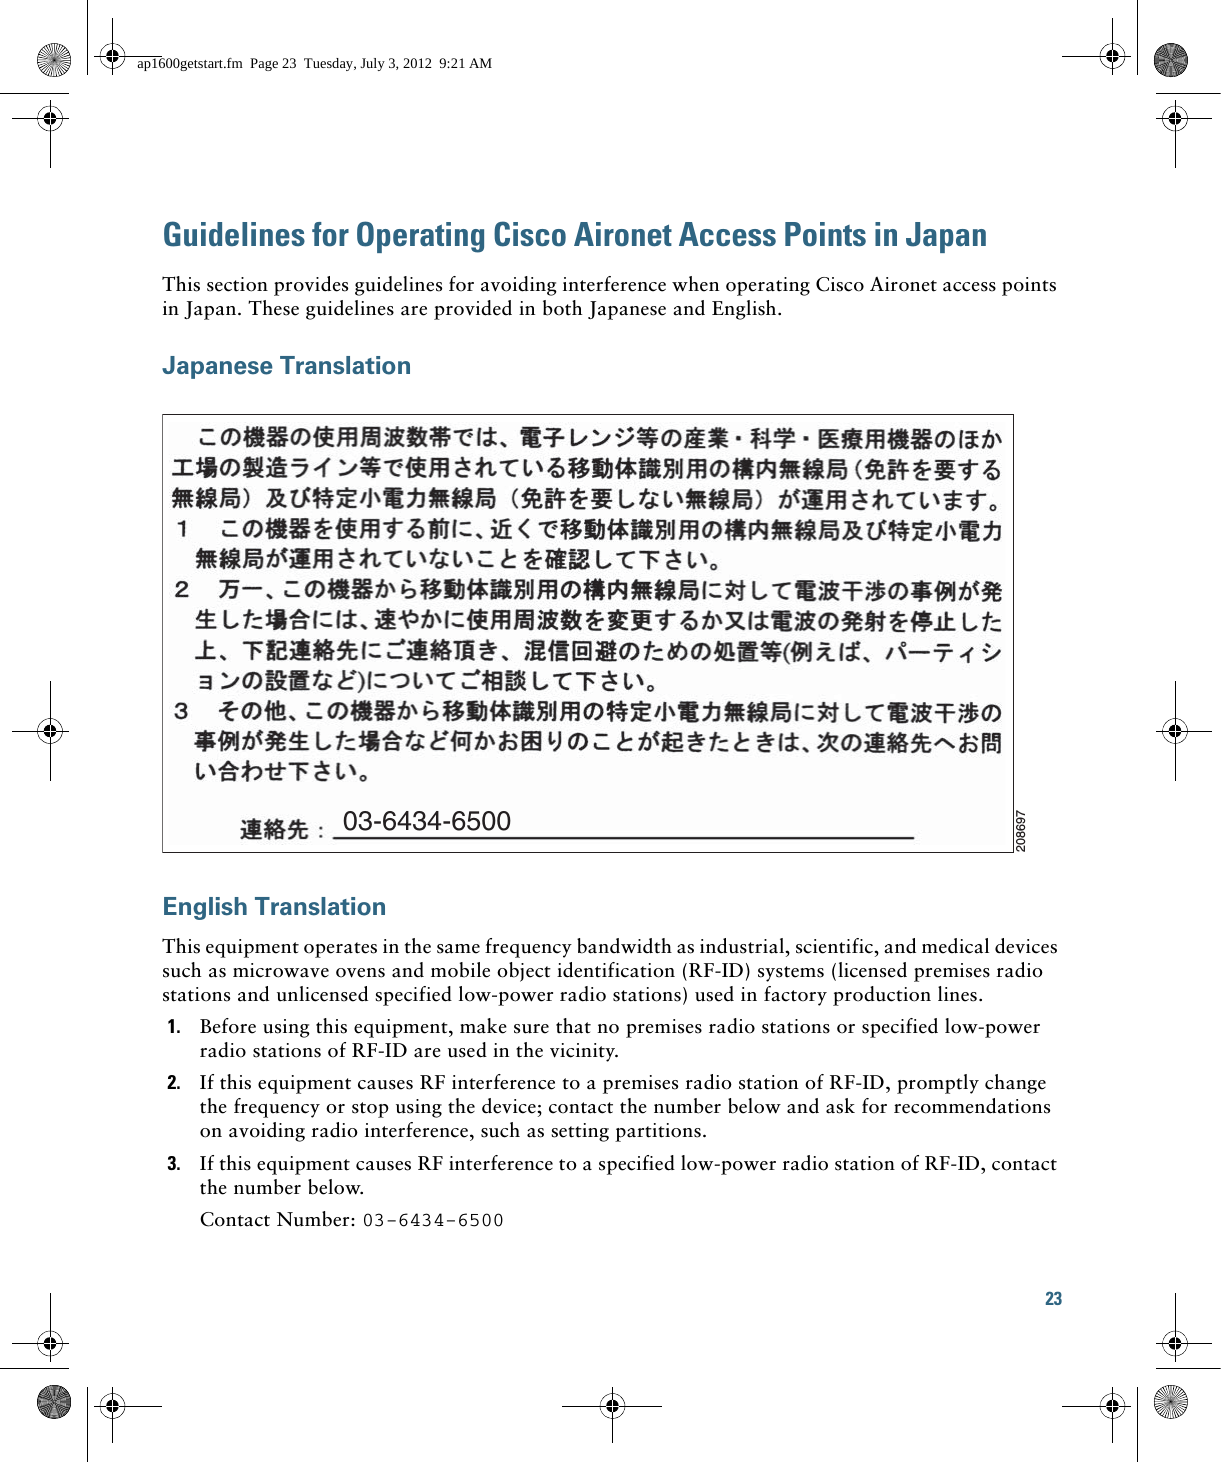 23 Guidelines for Operating Cisco Aironet Access Points in JapanThis section provides guidelines for avoiding interference when operating Cisco Aironet access points in Japan. These guidelines are provided in both Japanese and English.Japanese TranslationEnglish TranslationThis equipment operates in the same frequency bandwidth as industrial, scientific, and medical devices such as microwave ovens and mobile object identification (RF-ID) systems (licensed premises radio stations and unlicensed specified low-power radio stations) used in factory production lines.1. Before using this equipment, make sure that no premises radio stations or specified low-power radio stations of RF-ID are used in the vicinity.2. If this equipment causes RF interference to a premises radio station of RF-ID, promptly change the frequency or stop using the device; contact the number below and ask for recommendations on avoiding radio interference, such as setting partitions.3. If this equipment causes RF interference to a specified low-power radio station of RF-ID, contact the number below.Contact Number: 03-6434-650003-6434-6500208697ap1600getstart.fm  Page 23  Tuesday, July 3, 2012  9:21 AM